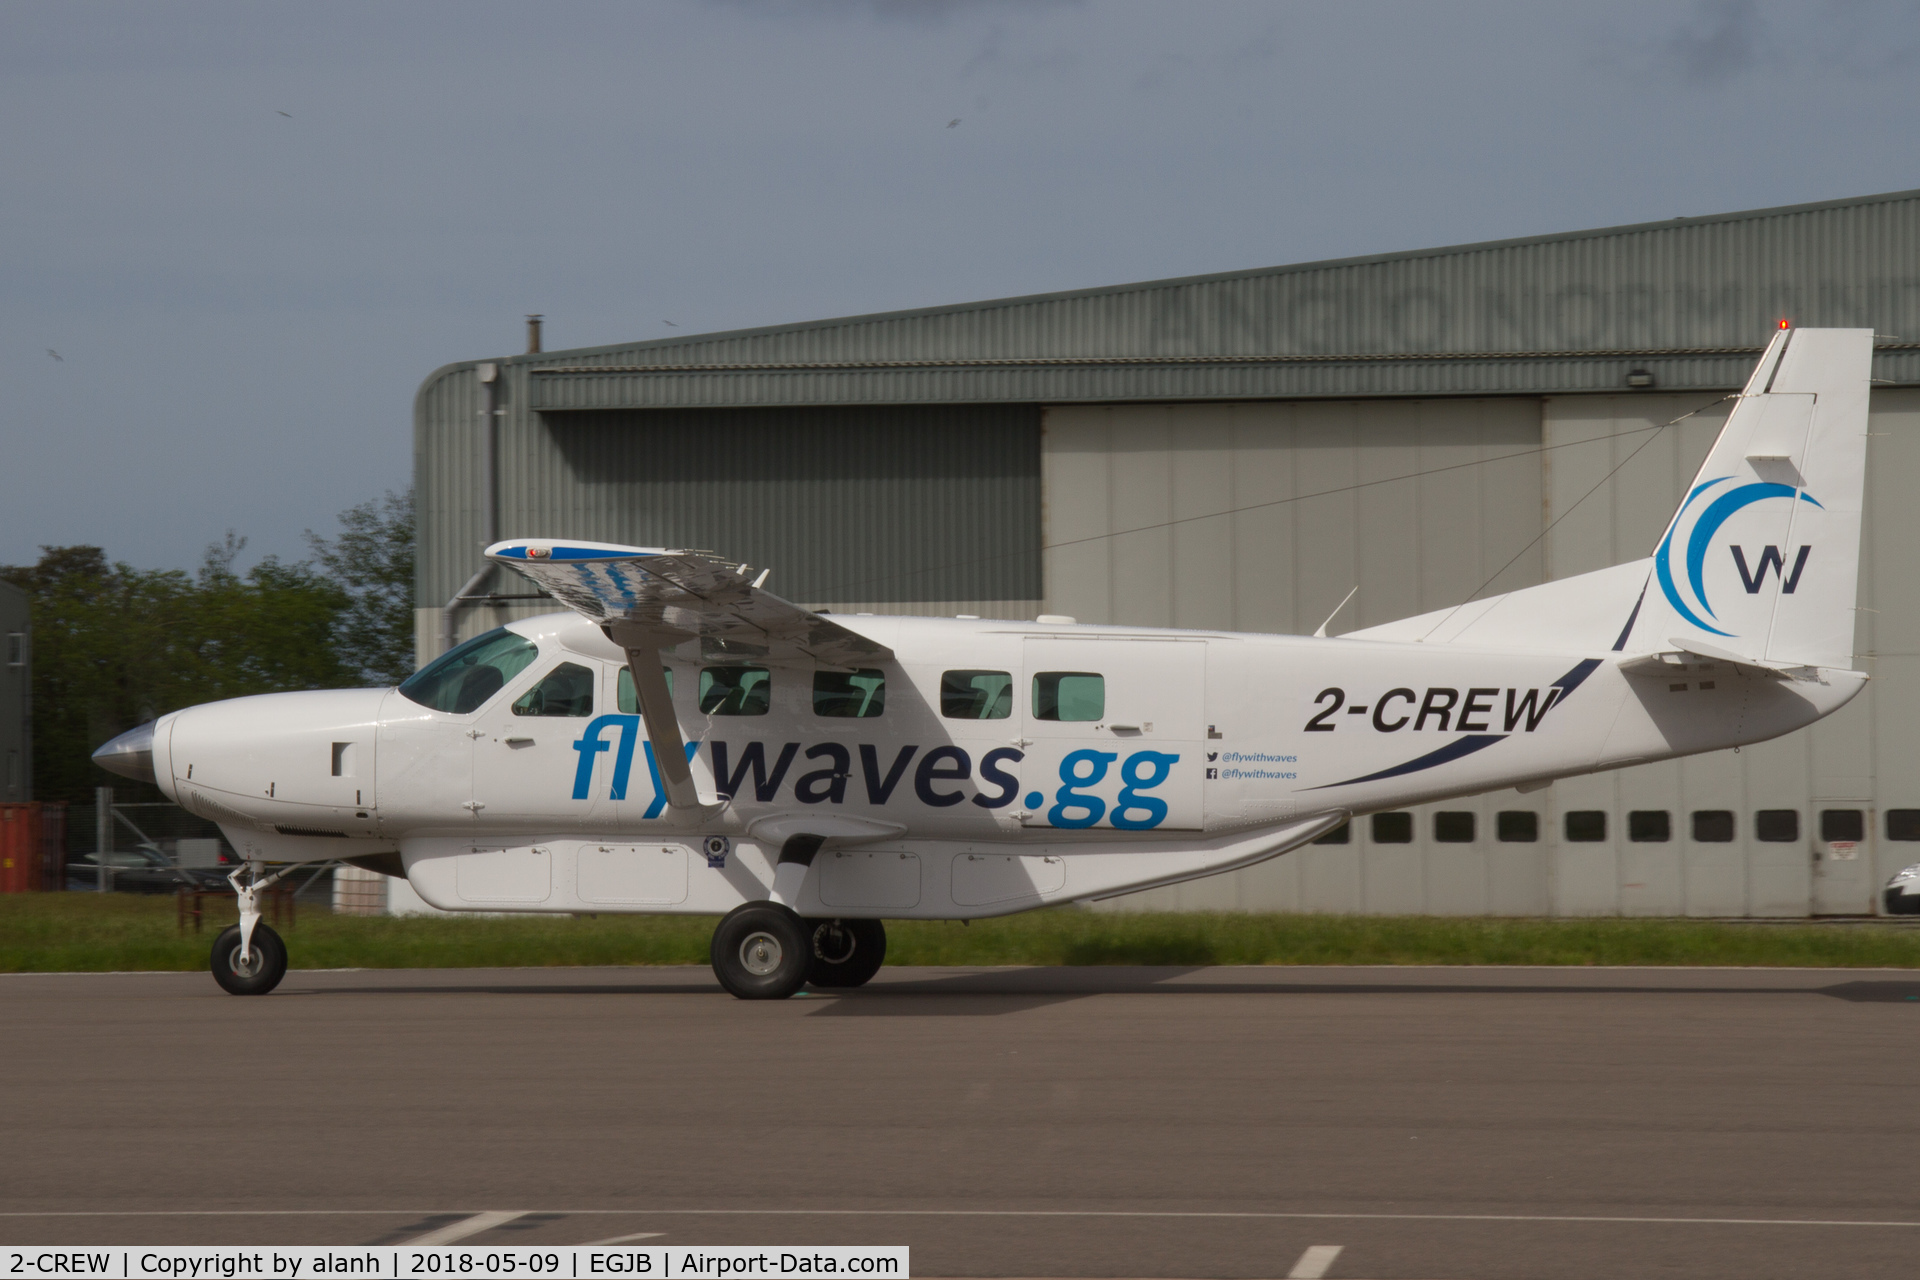 2-CREW, 2009 Cessna 208B Grand Caravan C/N 208B2148, Taxiing on the west apron at Guernsey, Liberation Day, 2018